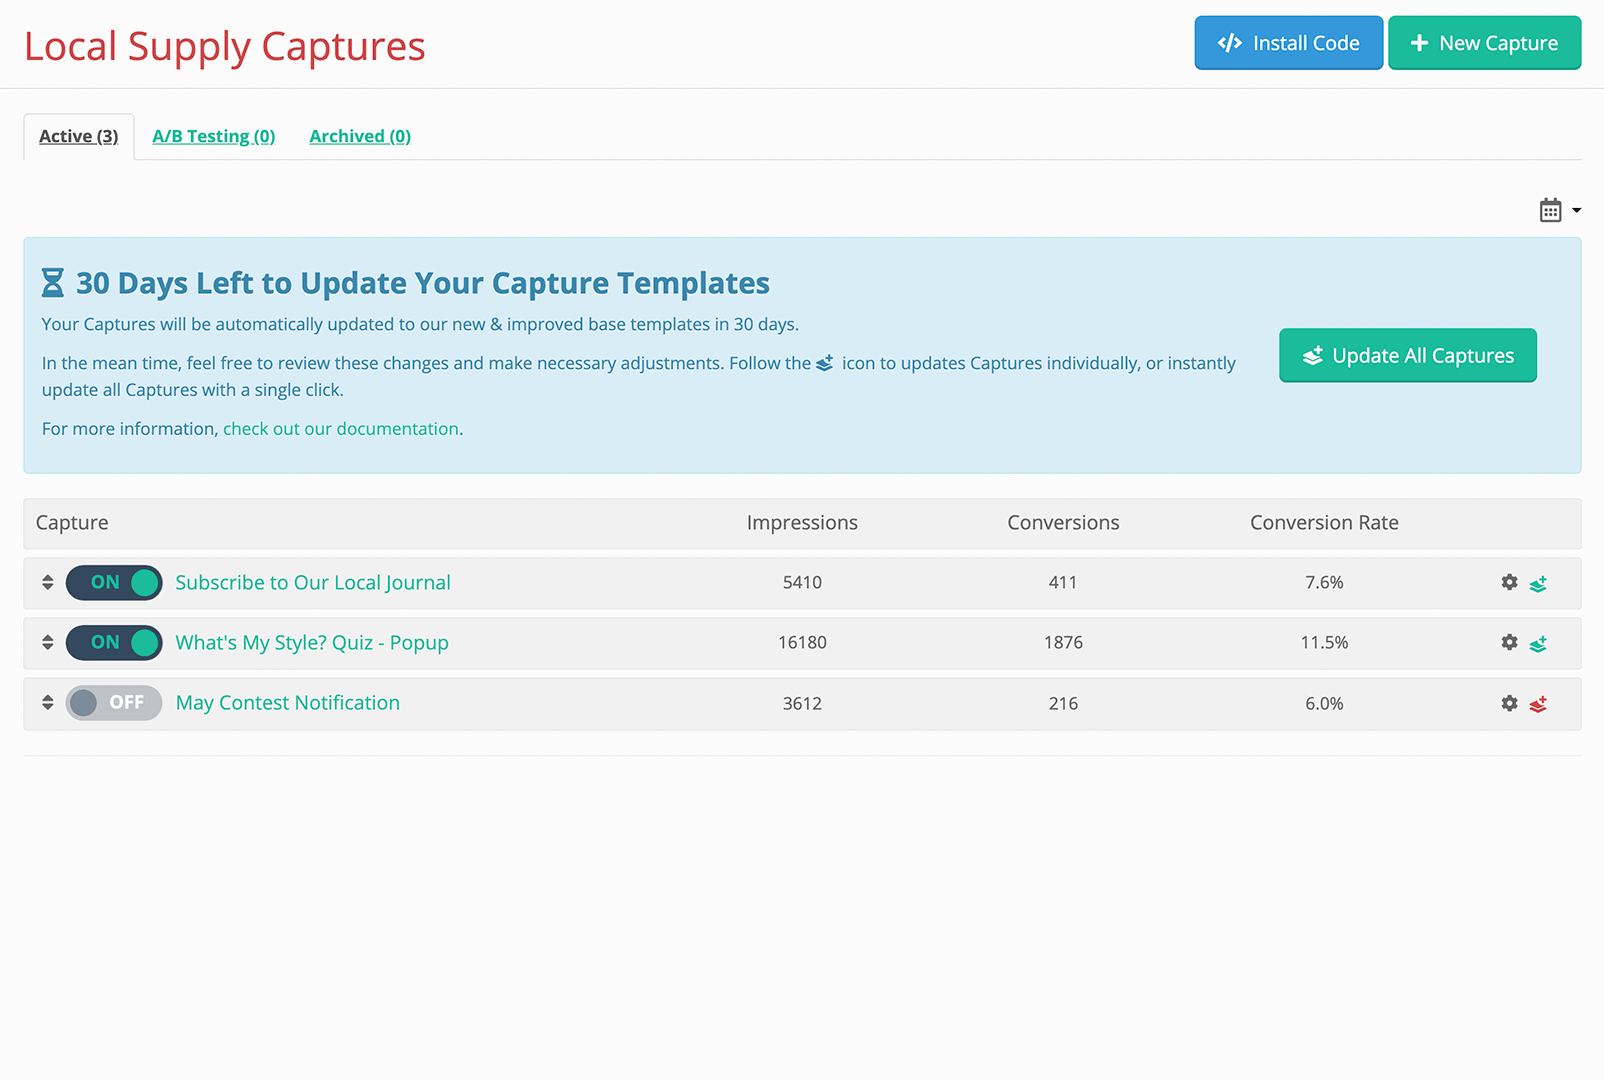 Gleam interface showing captures dashboard with 30 days left to update your capture template alert